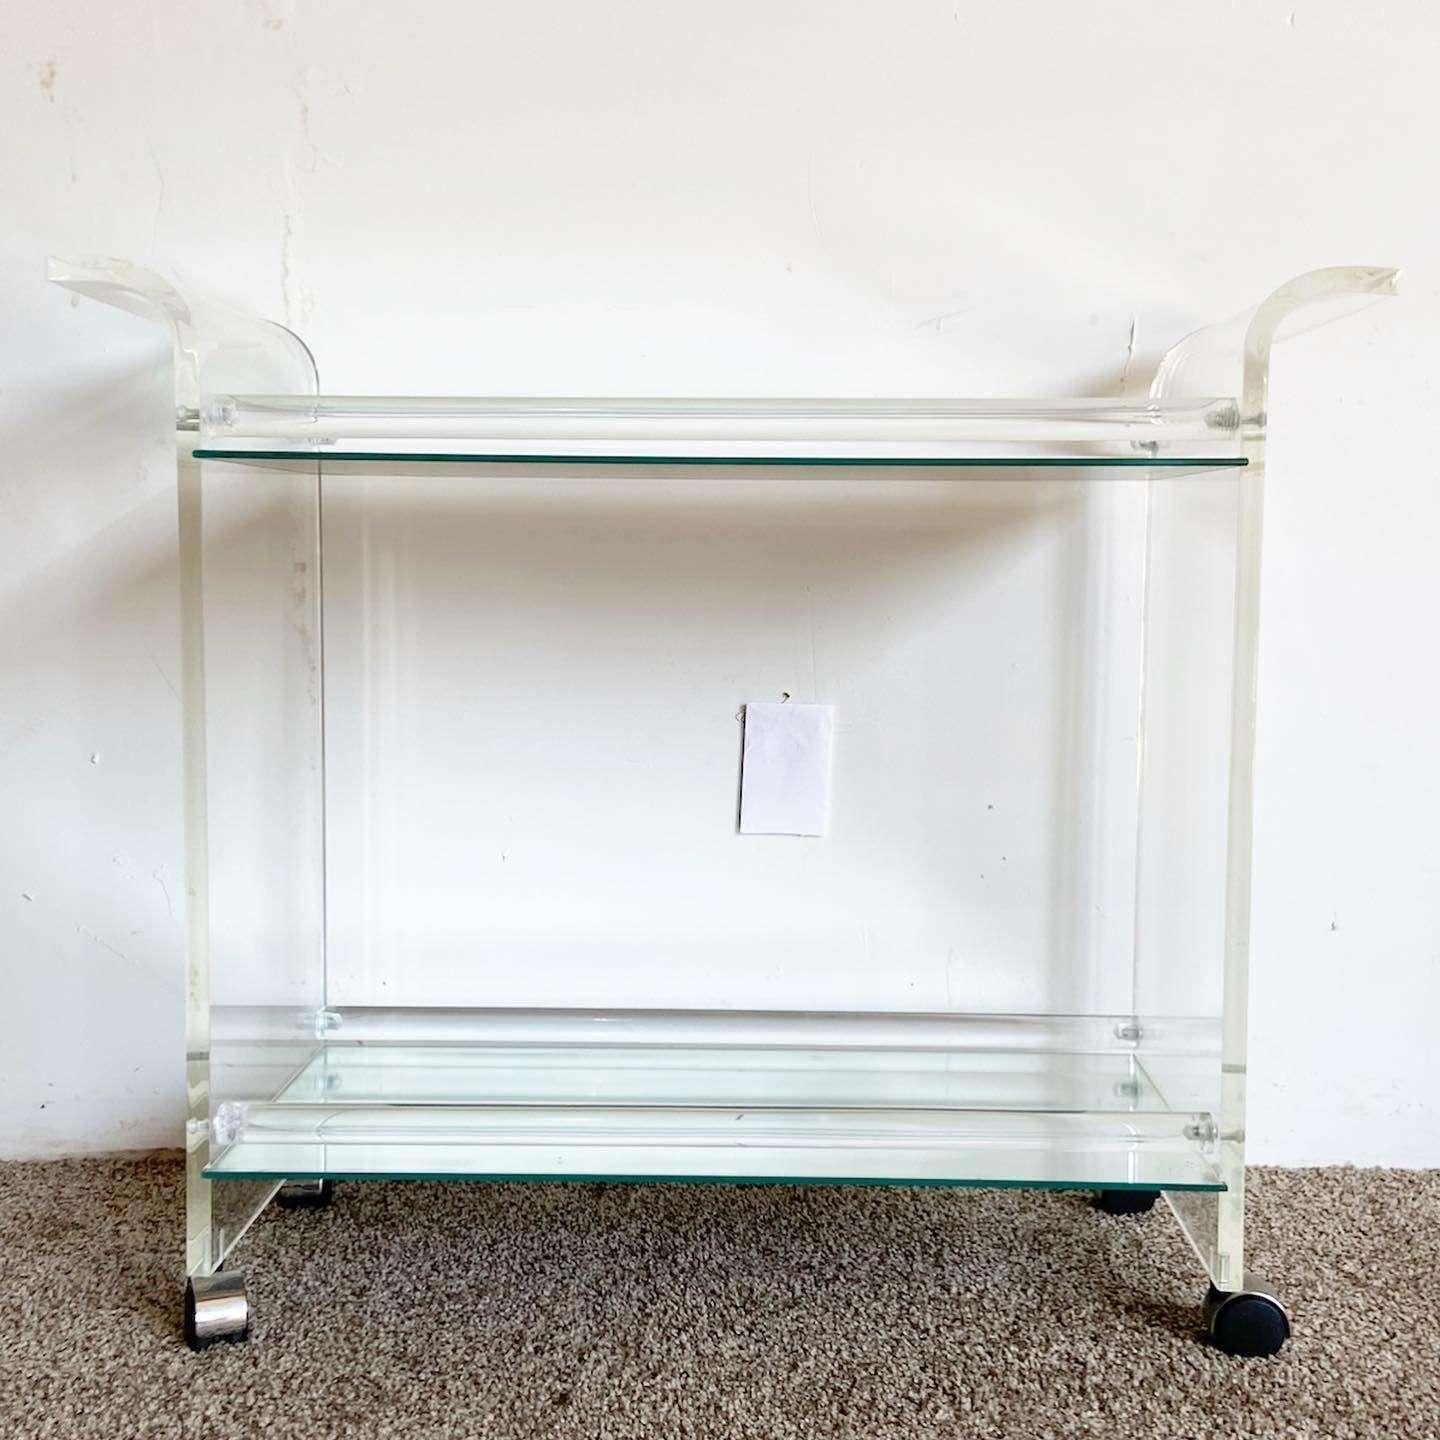 Amazing vintage postmodern lucite bar cart. Features two mirrored shelves.